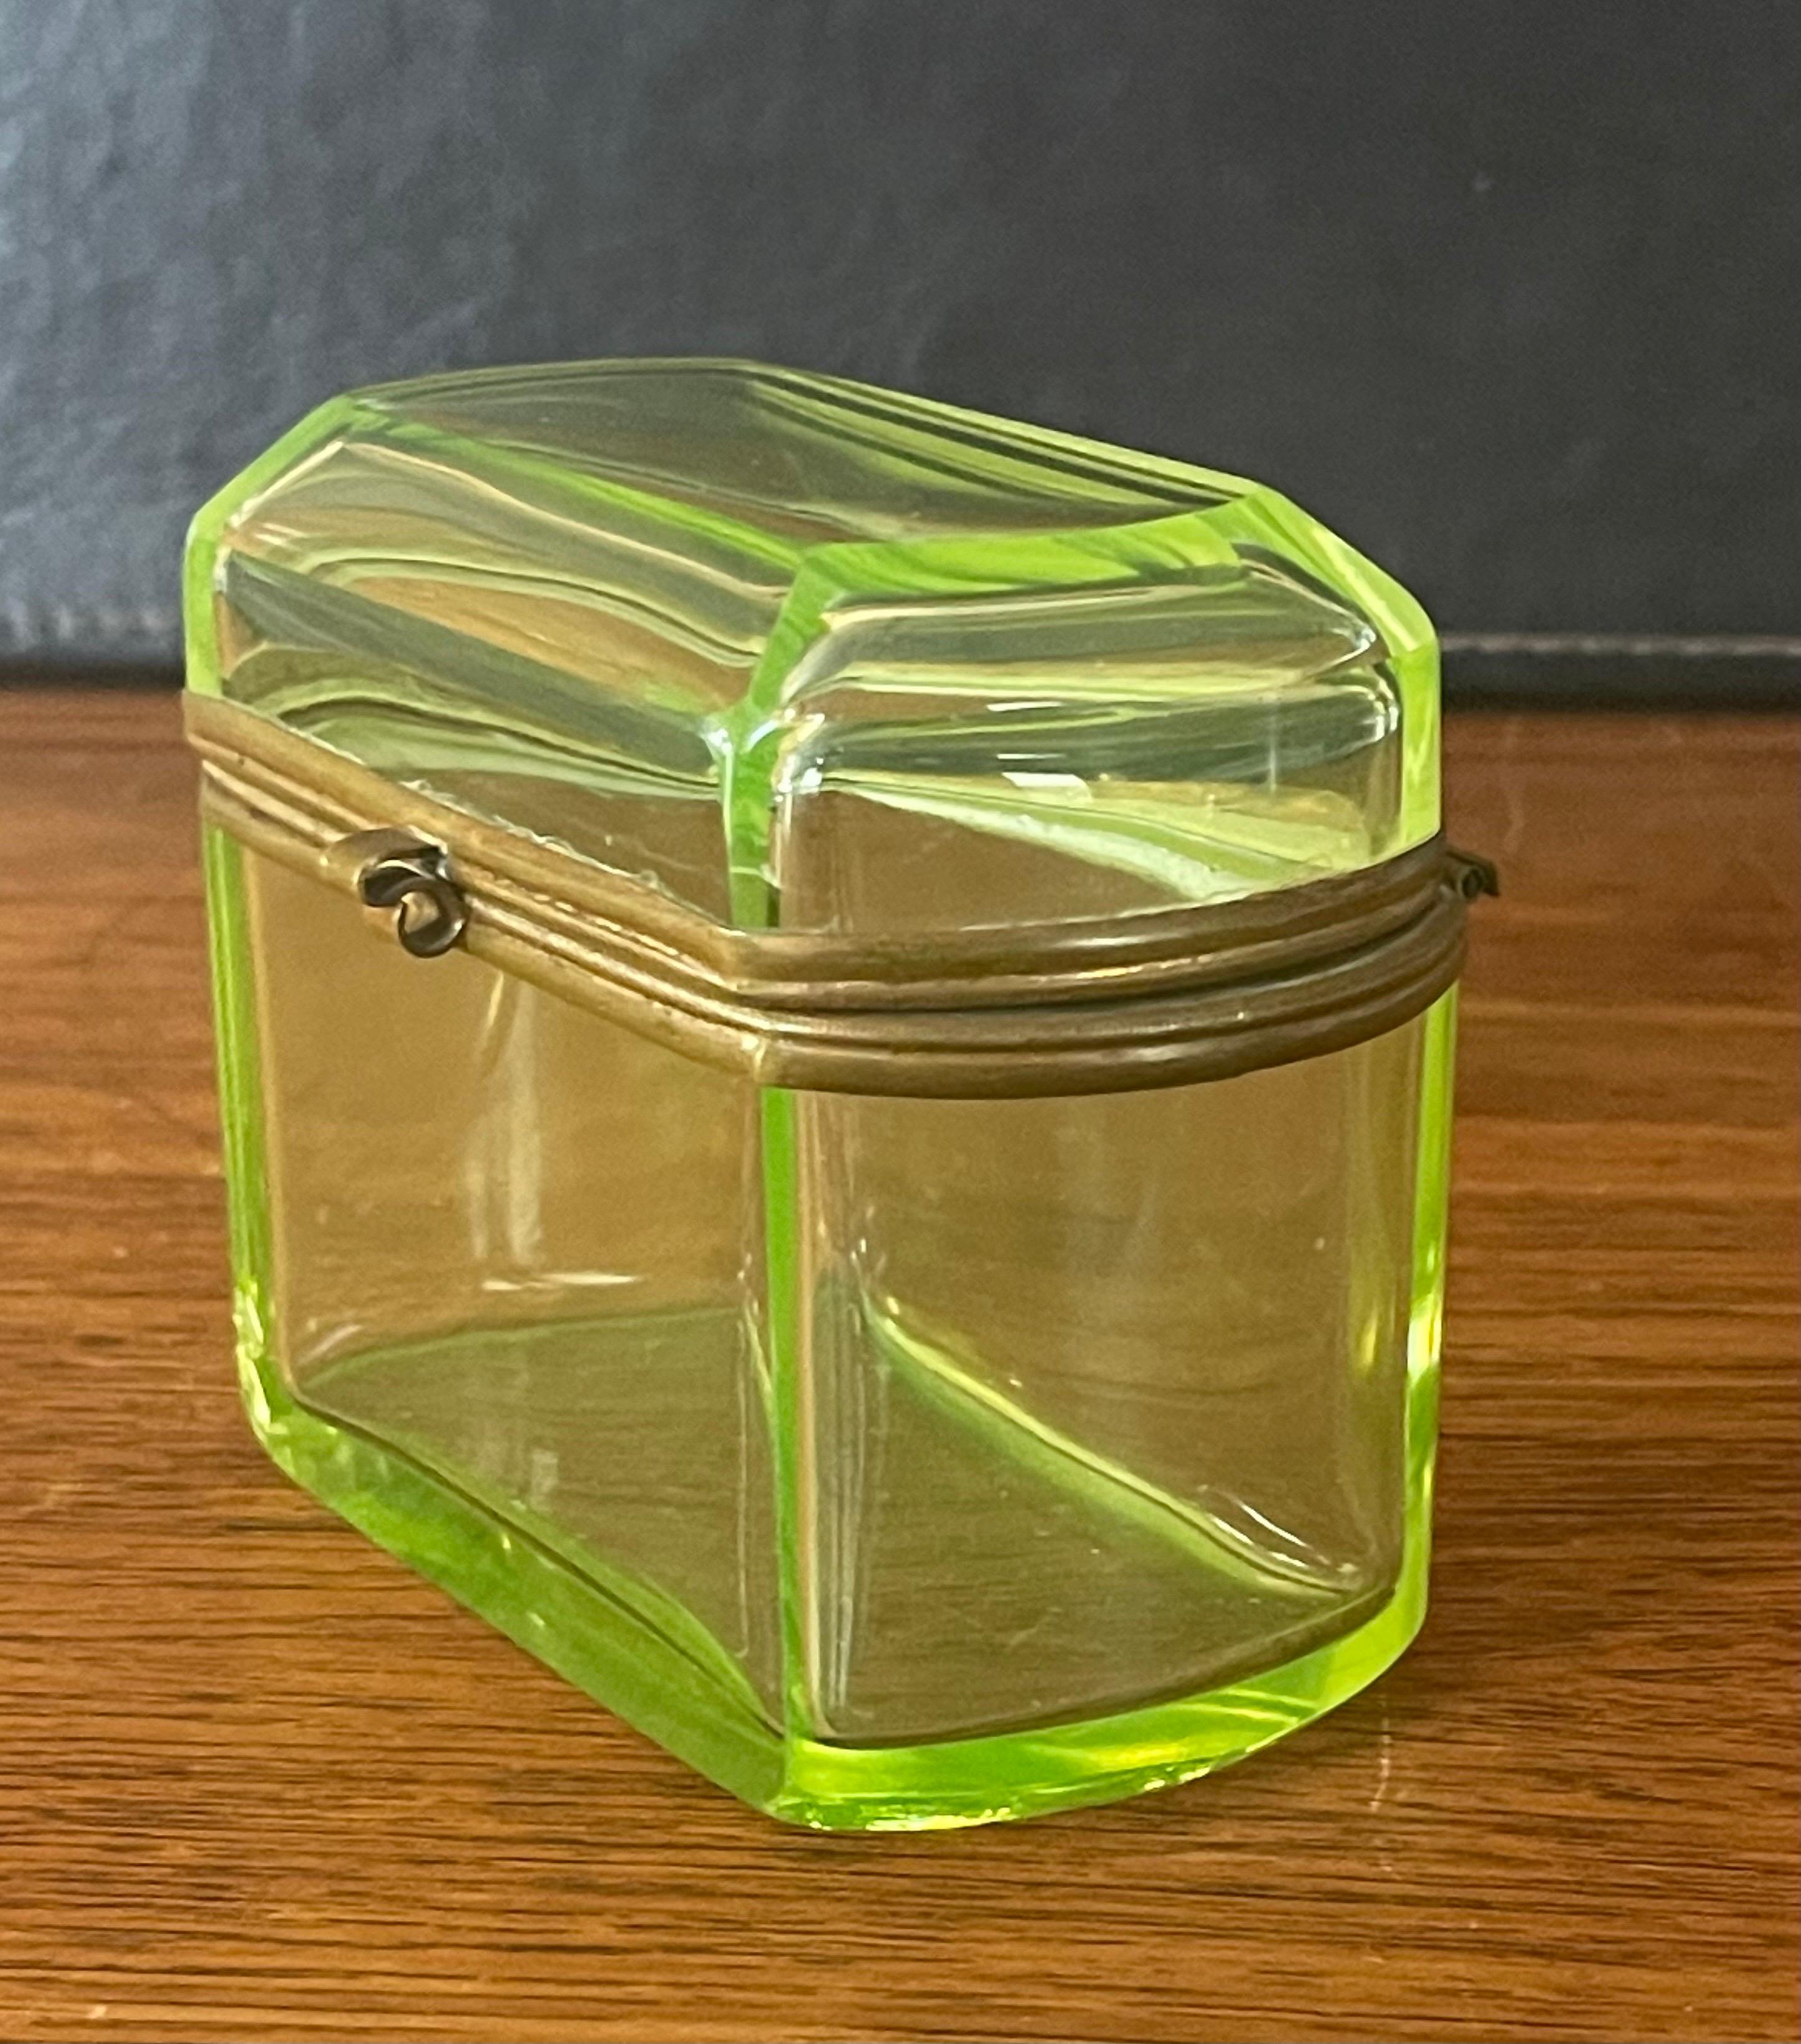 A fabulous French Victorian era vaseline colored glass lidded box, circa late 1800's. The box is made of a thick vaseline colored glass with bronze dore latch and trim. The piece is in very good antique condition with no chips or cracks and measures